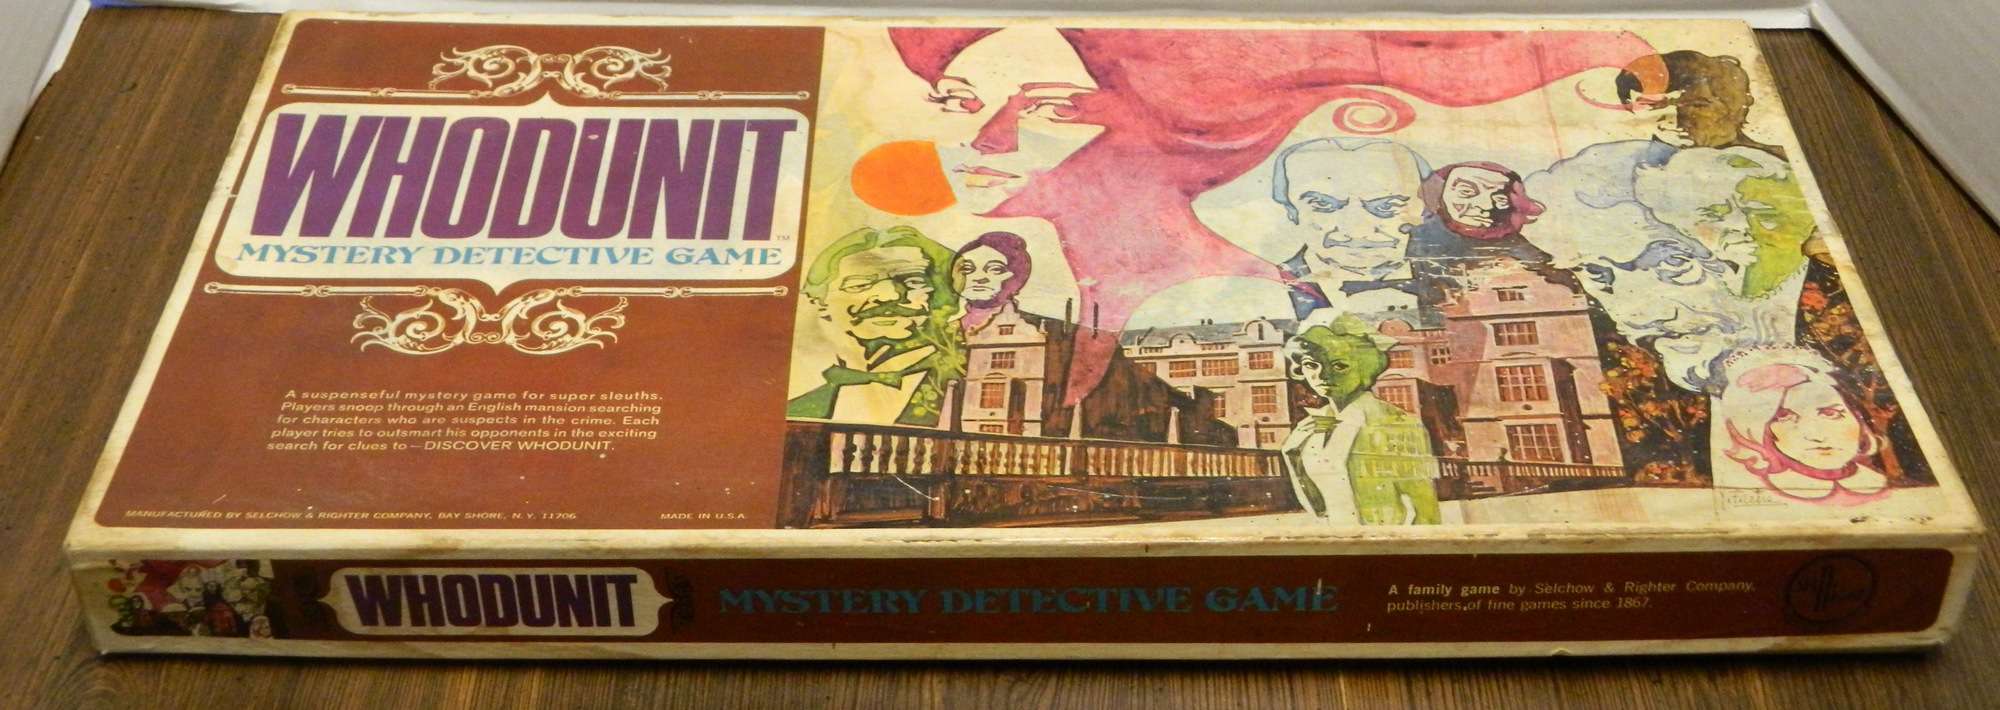 Whodunit Mystery Detective Game (1972) Review and Instructions